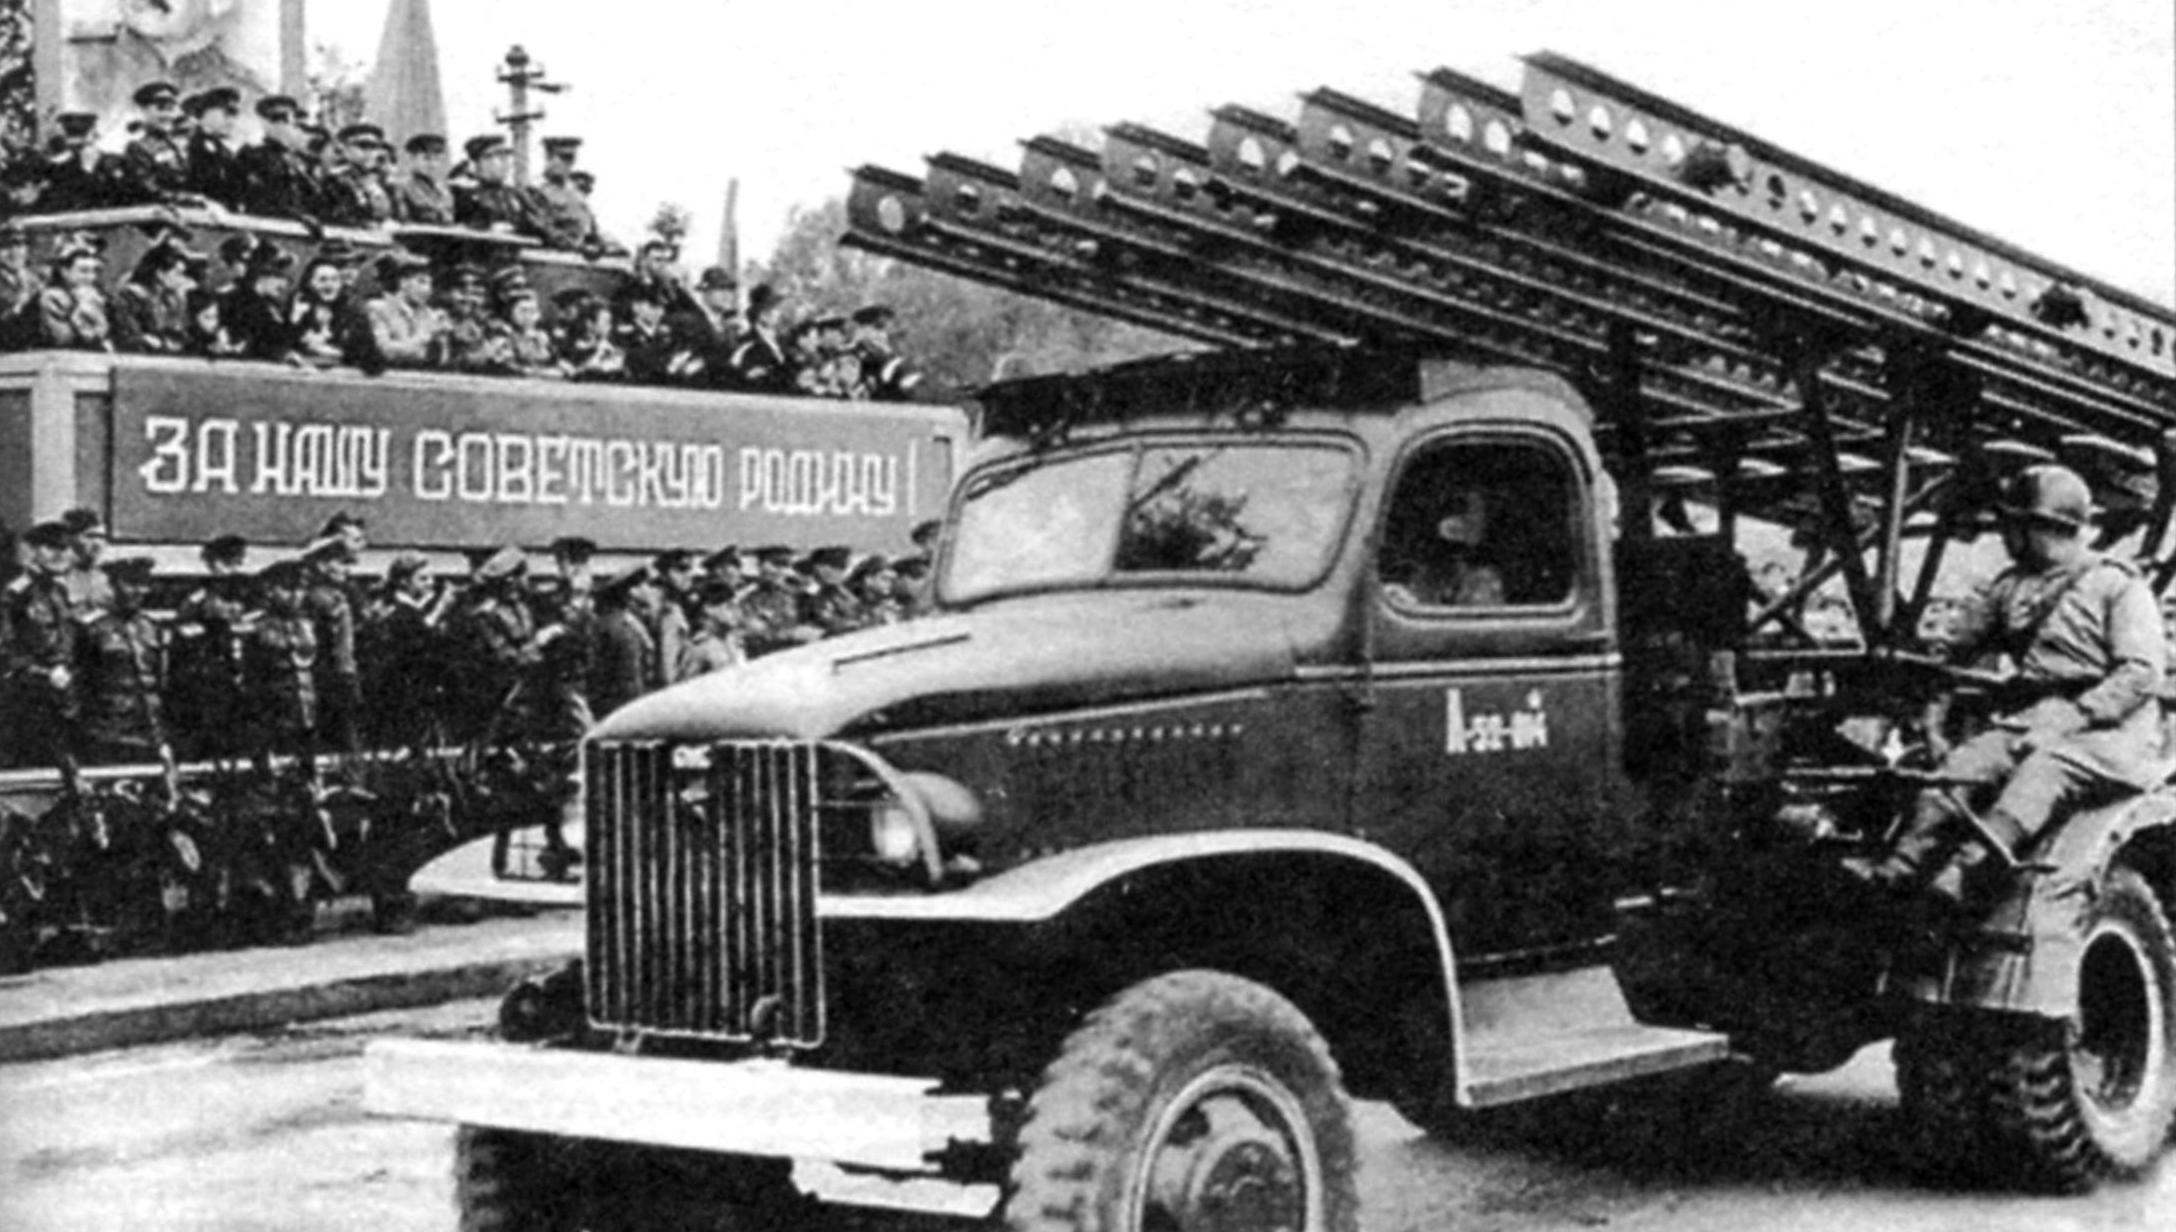 Installing the BM-13 on the chassis of the American truck military vehicle GМС ССКW-353 (2x4) on one of the parades in Germany. 1945.